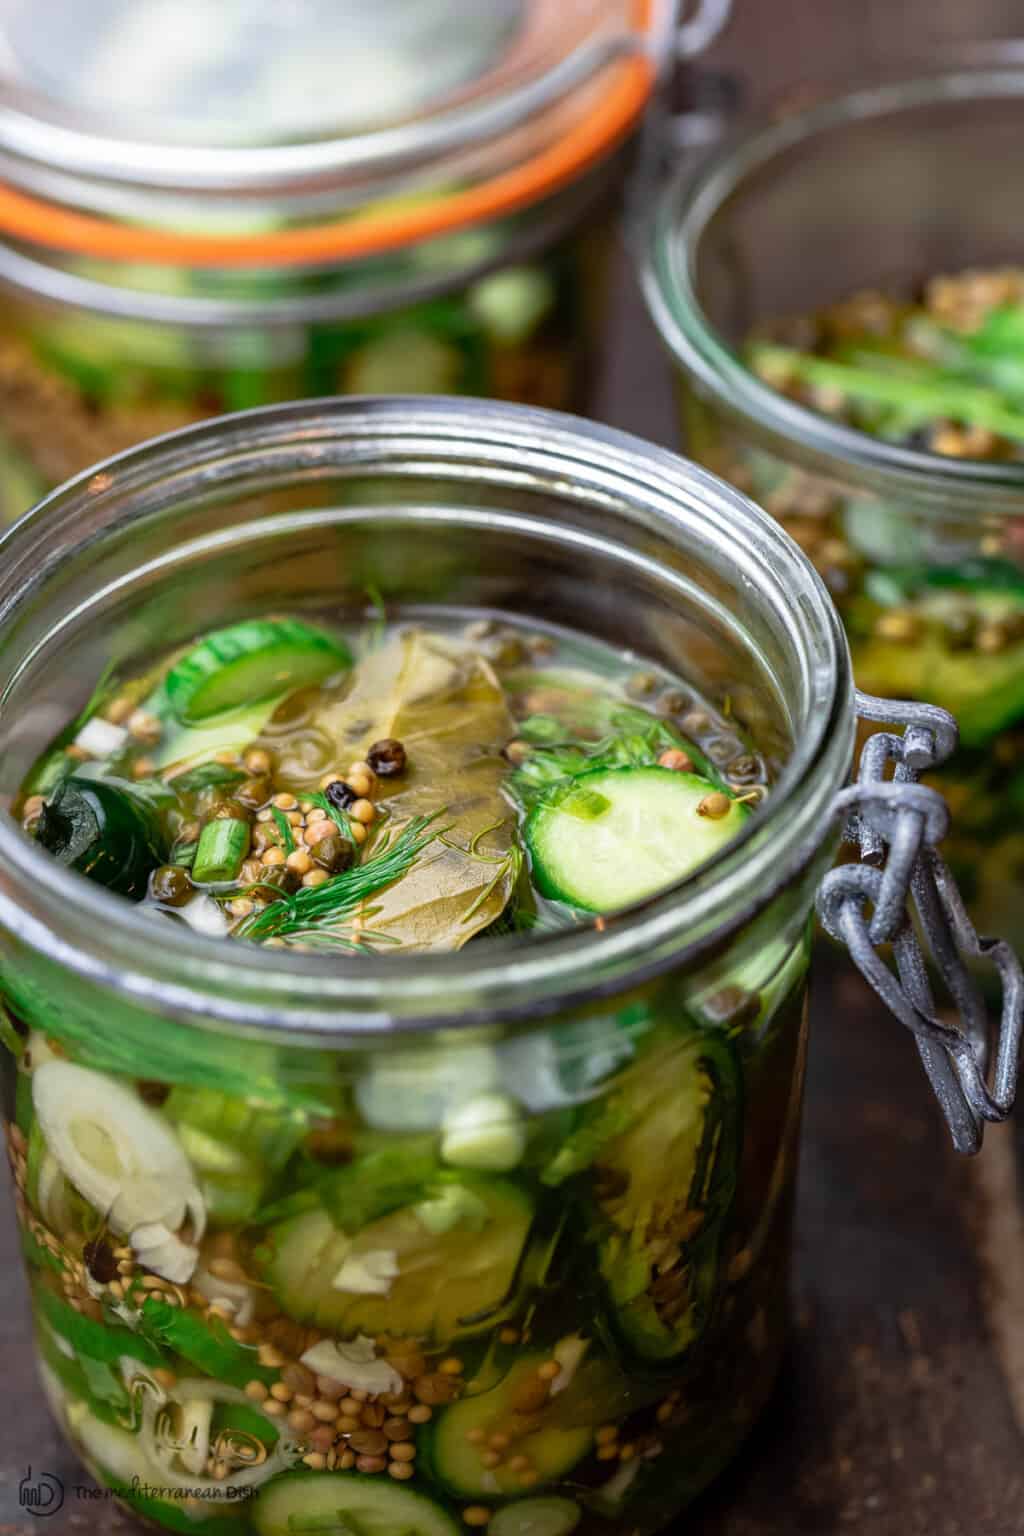 Quick Pickled Cucumber (How to Pickle Cucumbers) | The Mediterranean Dish